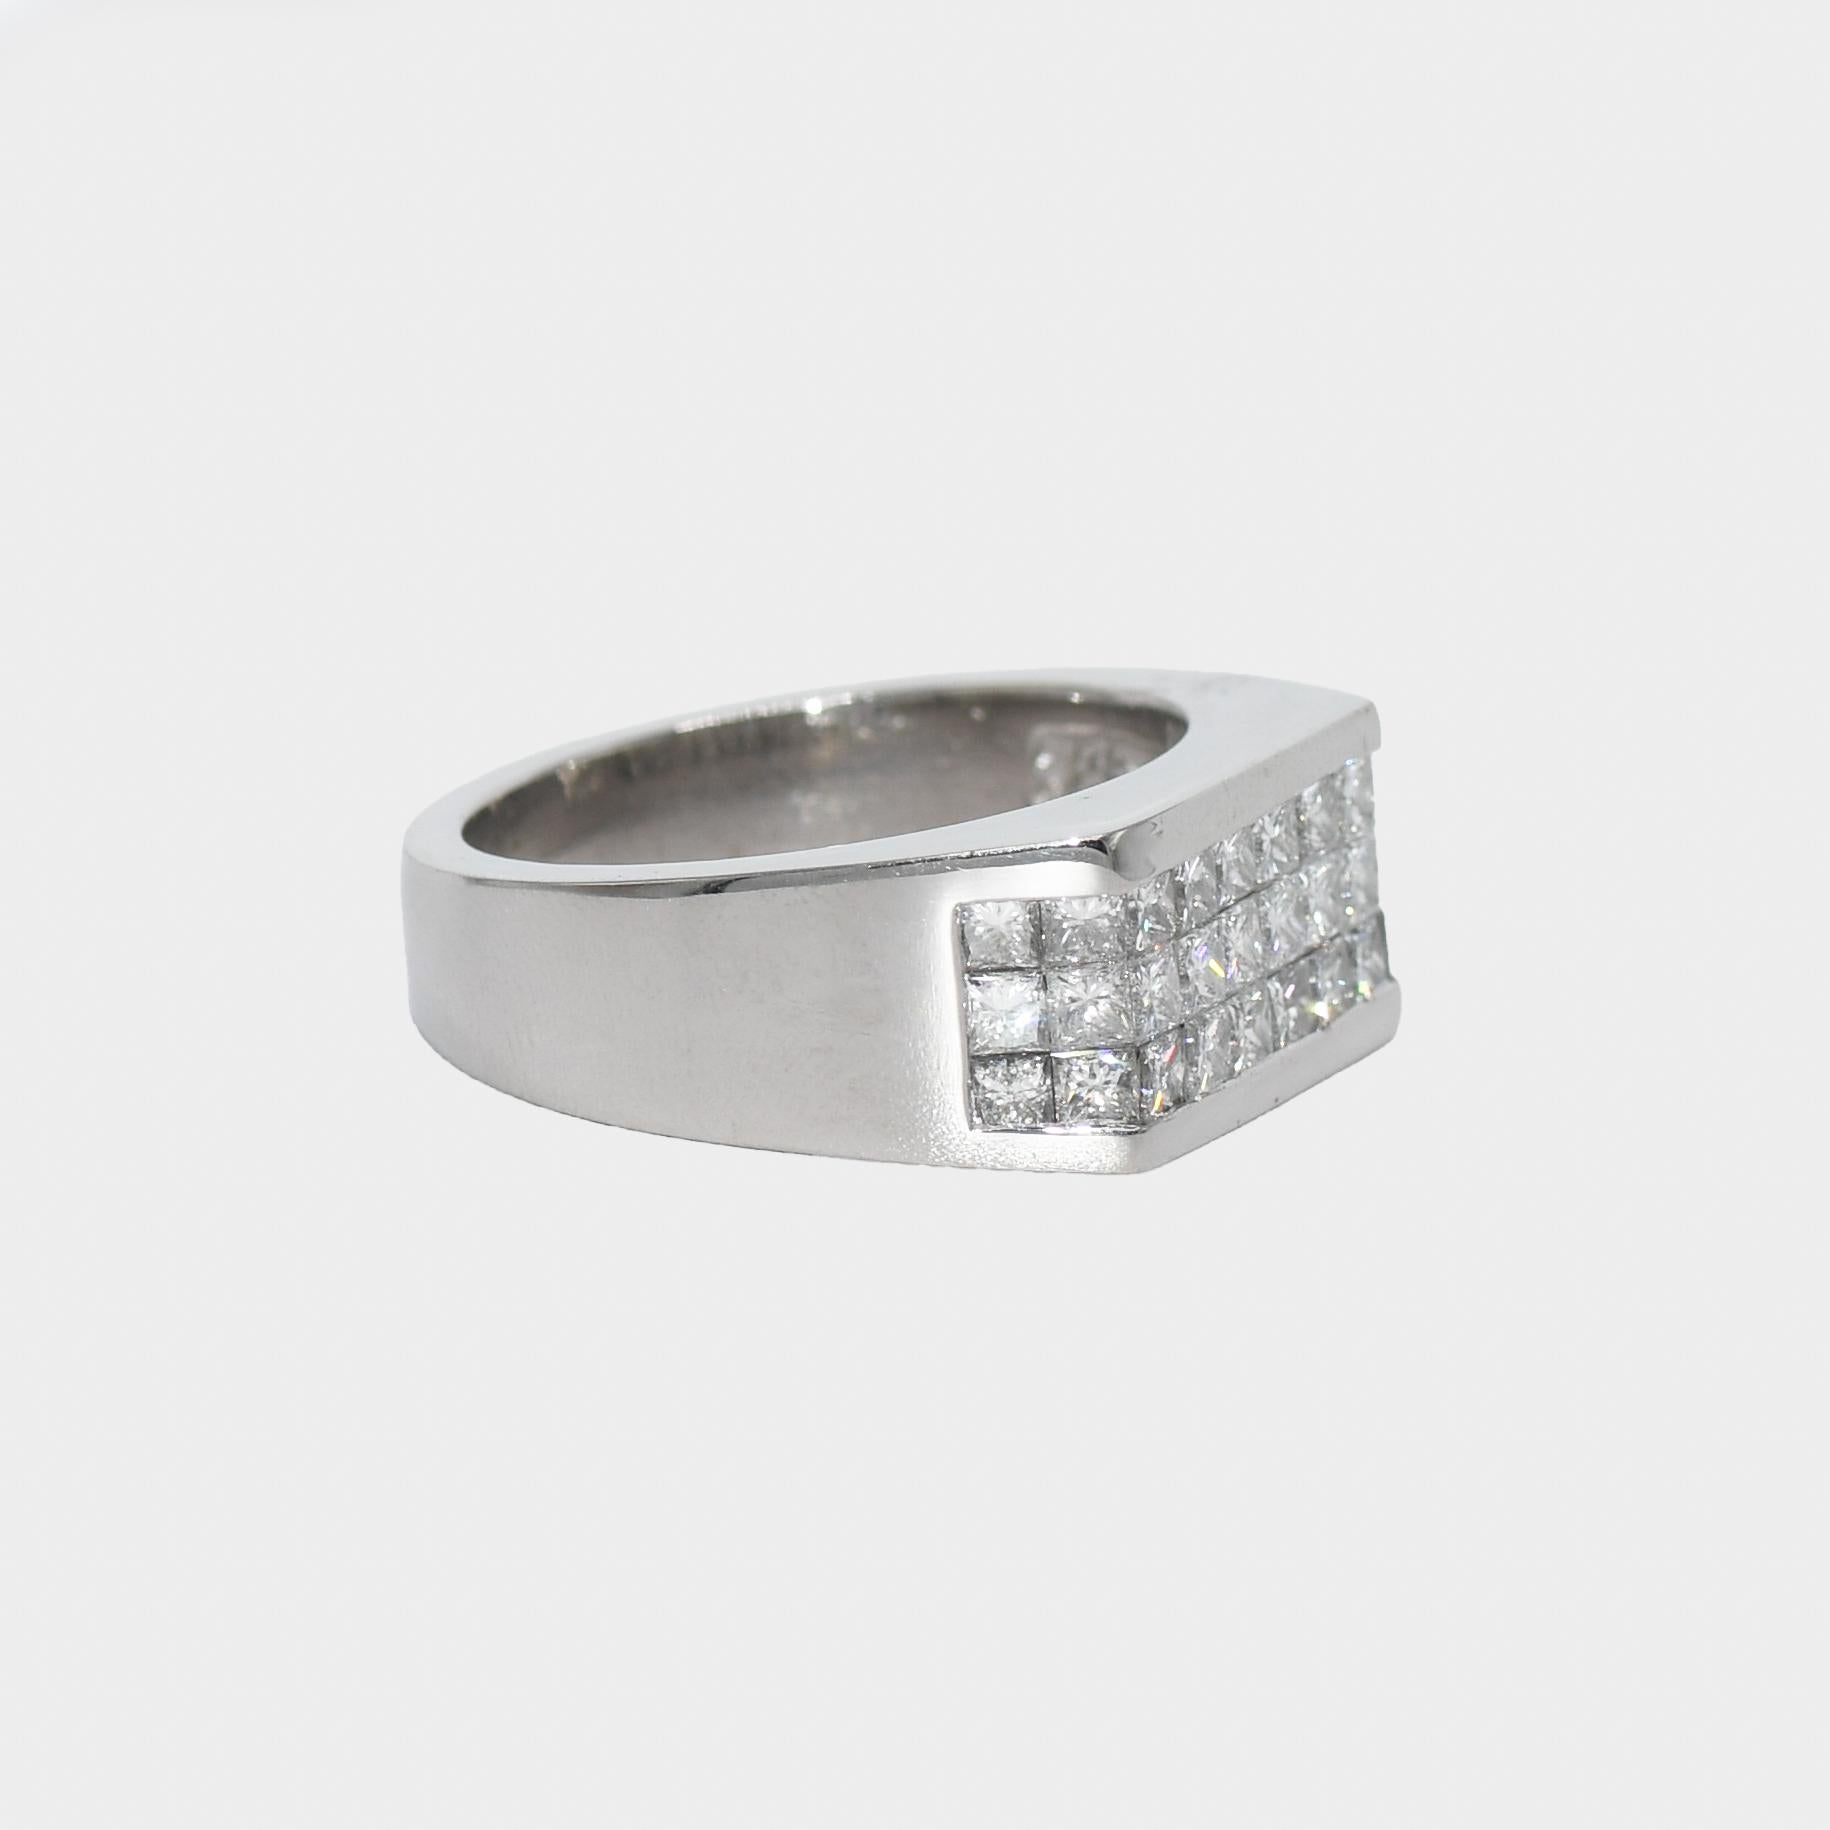 Men's platinum and diamond ring.
Stamped Plat and weighs 27.2 grams.
The diamonds are princess cuts, 2.00 total carats, G to H color and mostly VS clarity.
One diamond has a small chip on the corner that can only be seen under magnification.
The top